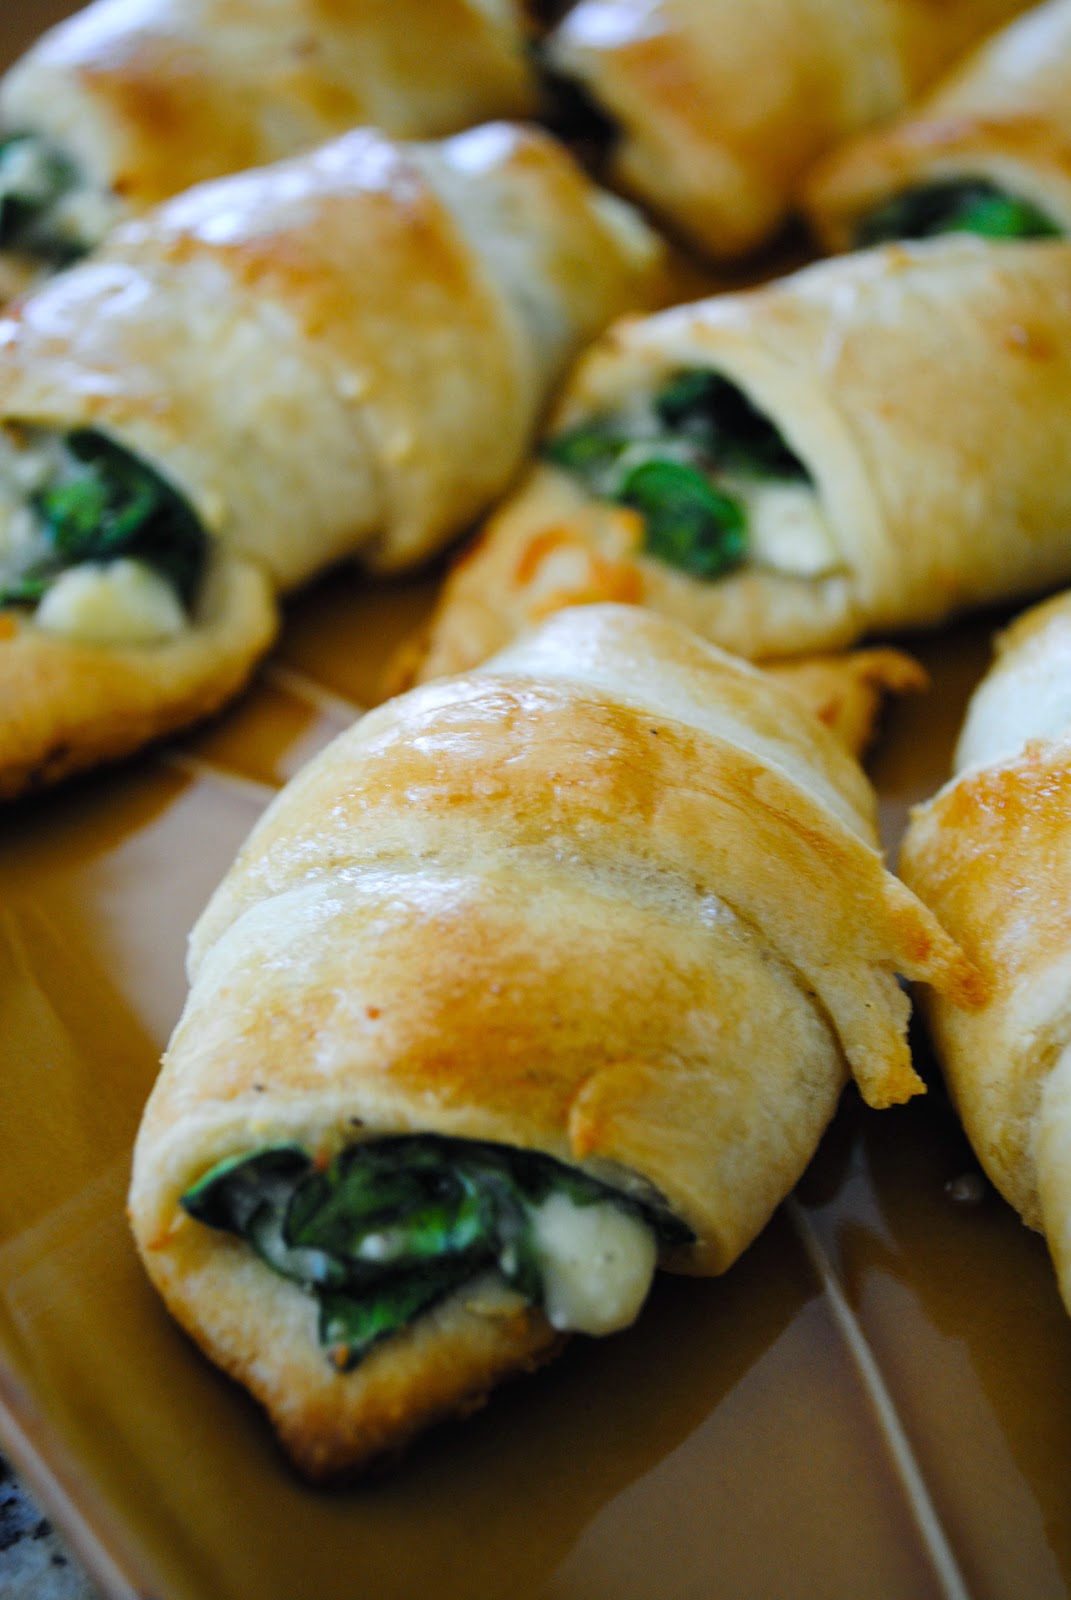 Cheesy Spinach Crescent Rolls | Cook'n is Fun - Food Recipes, Dessert